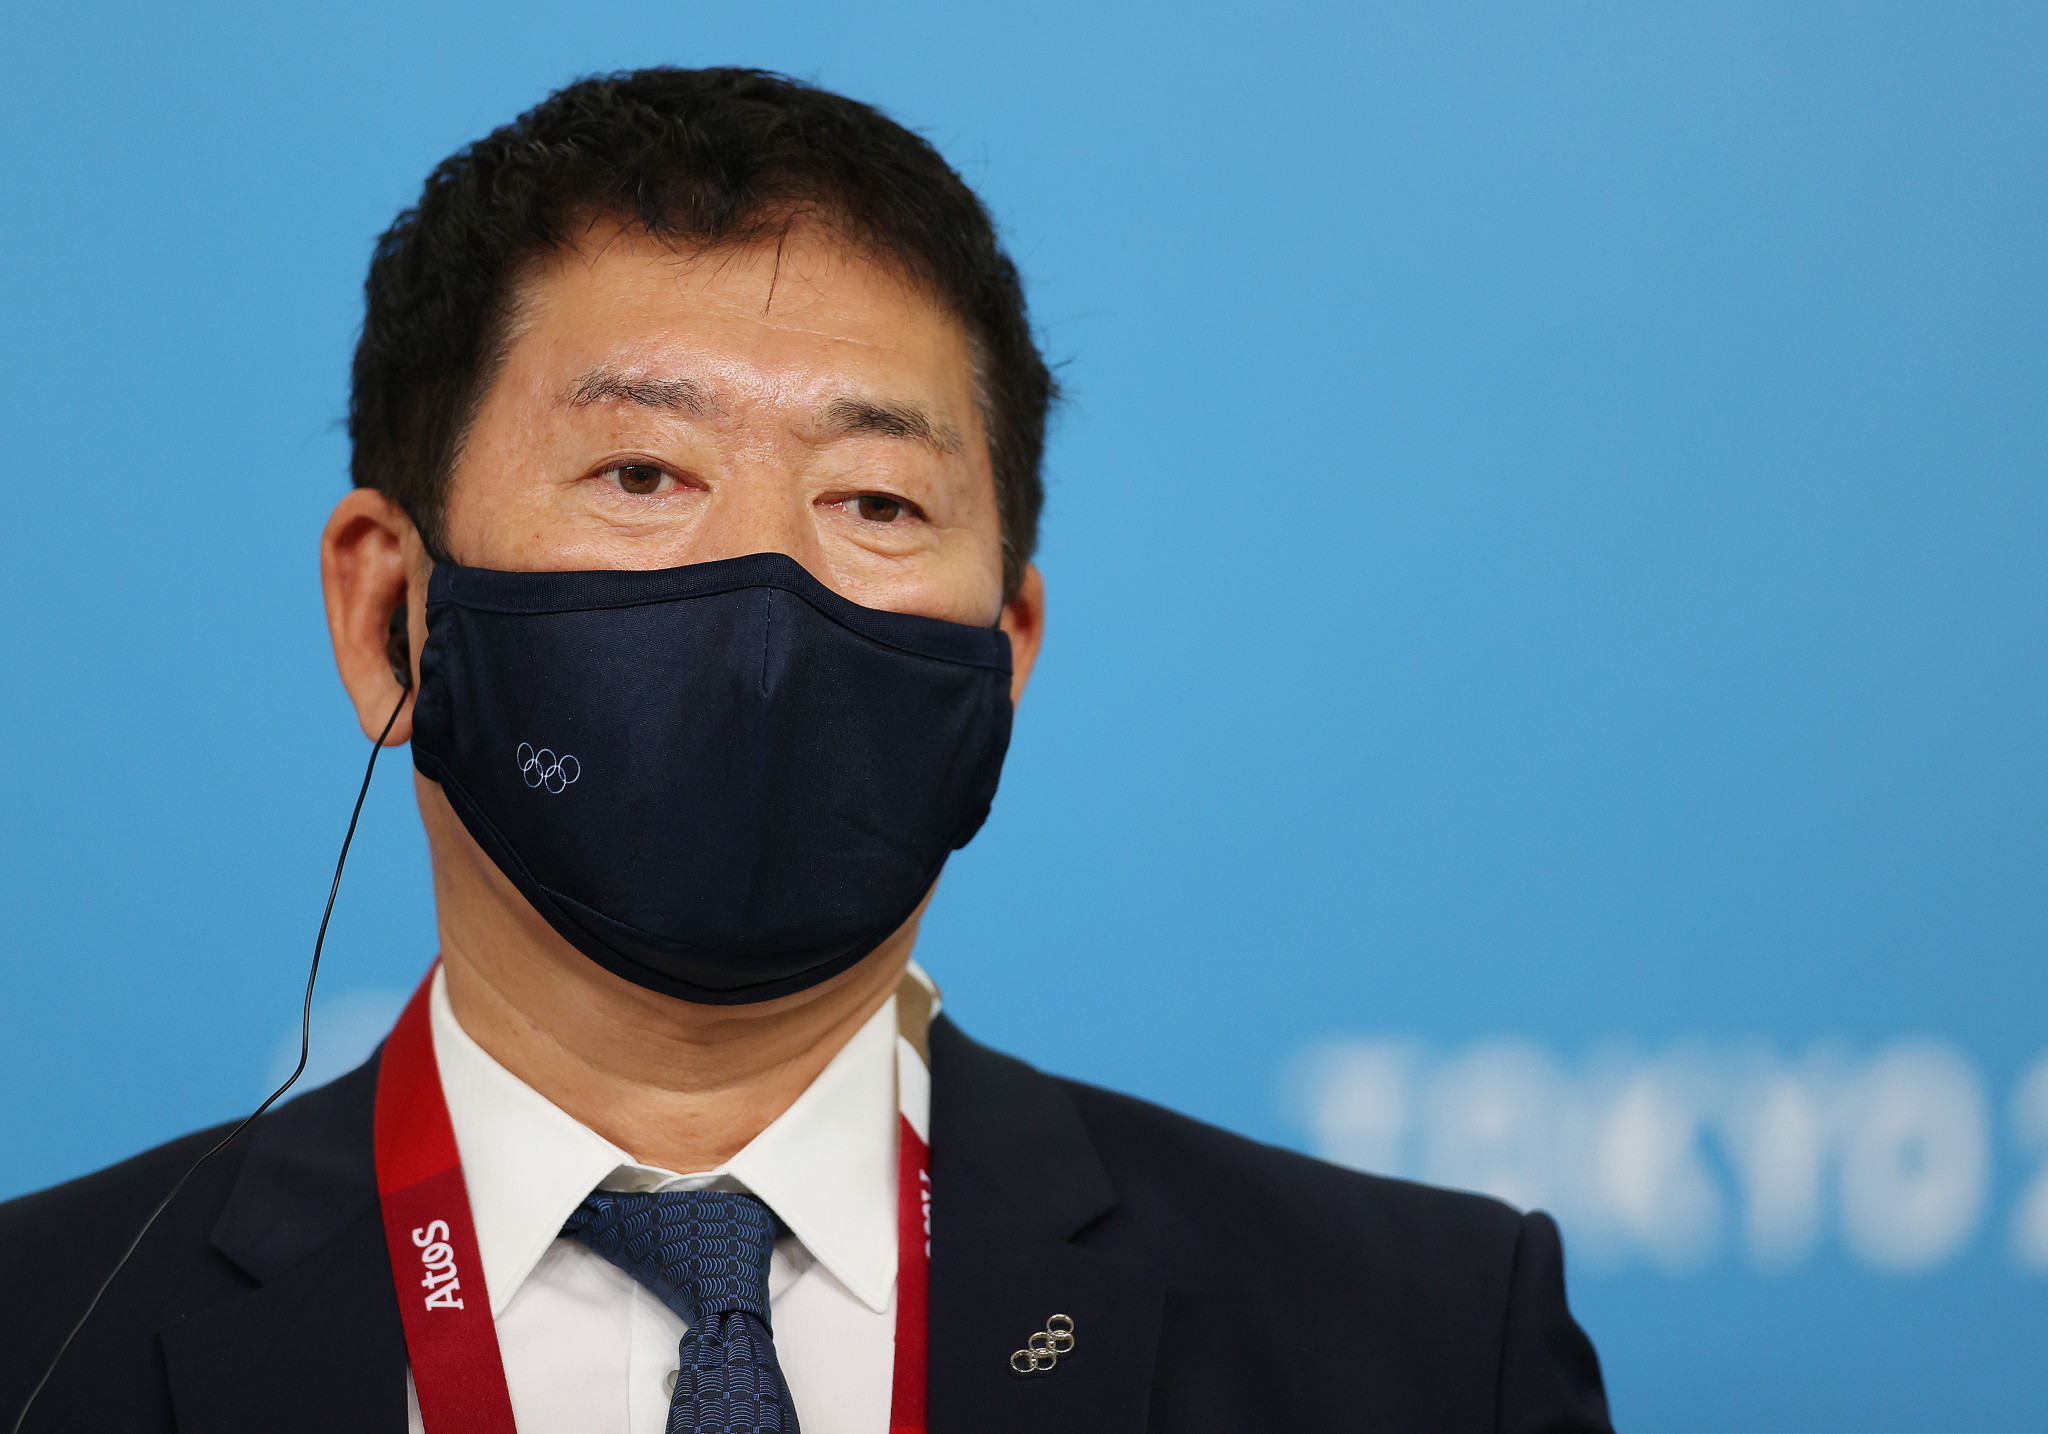  International Gymnastics Federation (FIG), led by President Morinari Watanabe, borrowed a total of approximately $1.5 million in 2020 ©Getty Images